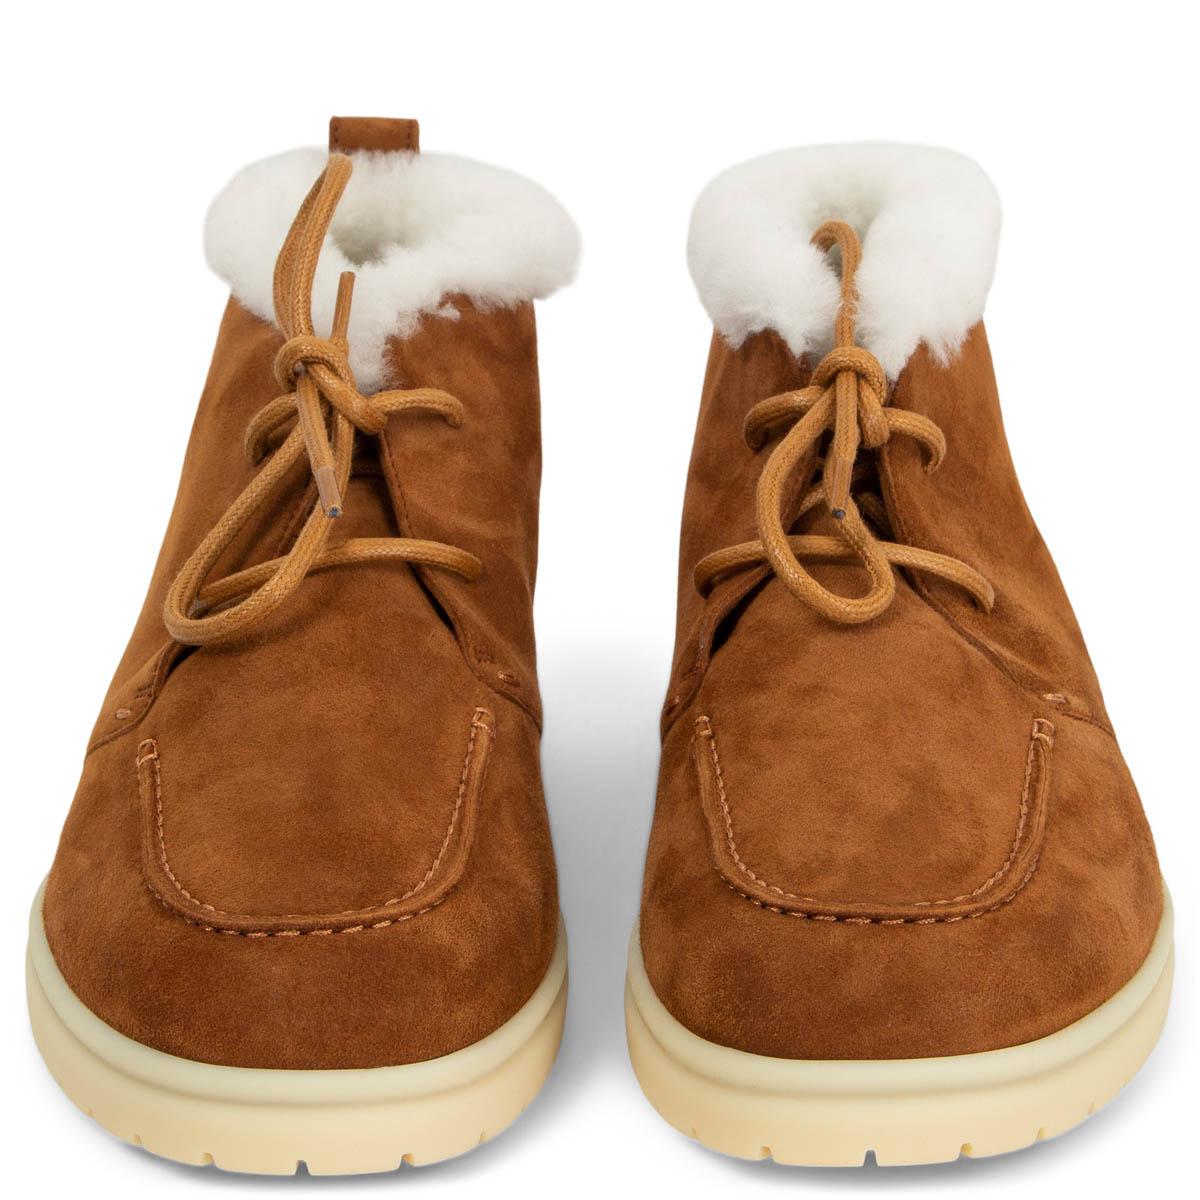 100% authentic Loro Piana Open Walk lace-up ankle boots in camel suede and off-white full shearling lining featuring light yellow rubber sole. Brand new. 

Measurements
Imprinted Size	39
Shoe Size	39
Inside Sole	26cm (10.1in)
Width	8cm (3.1in)

All